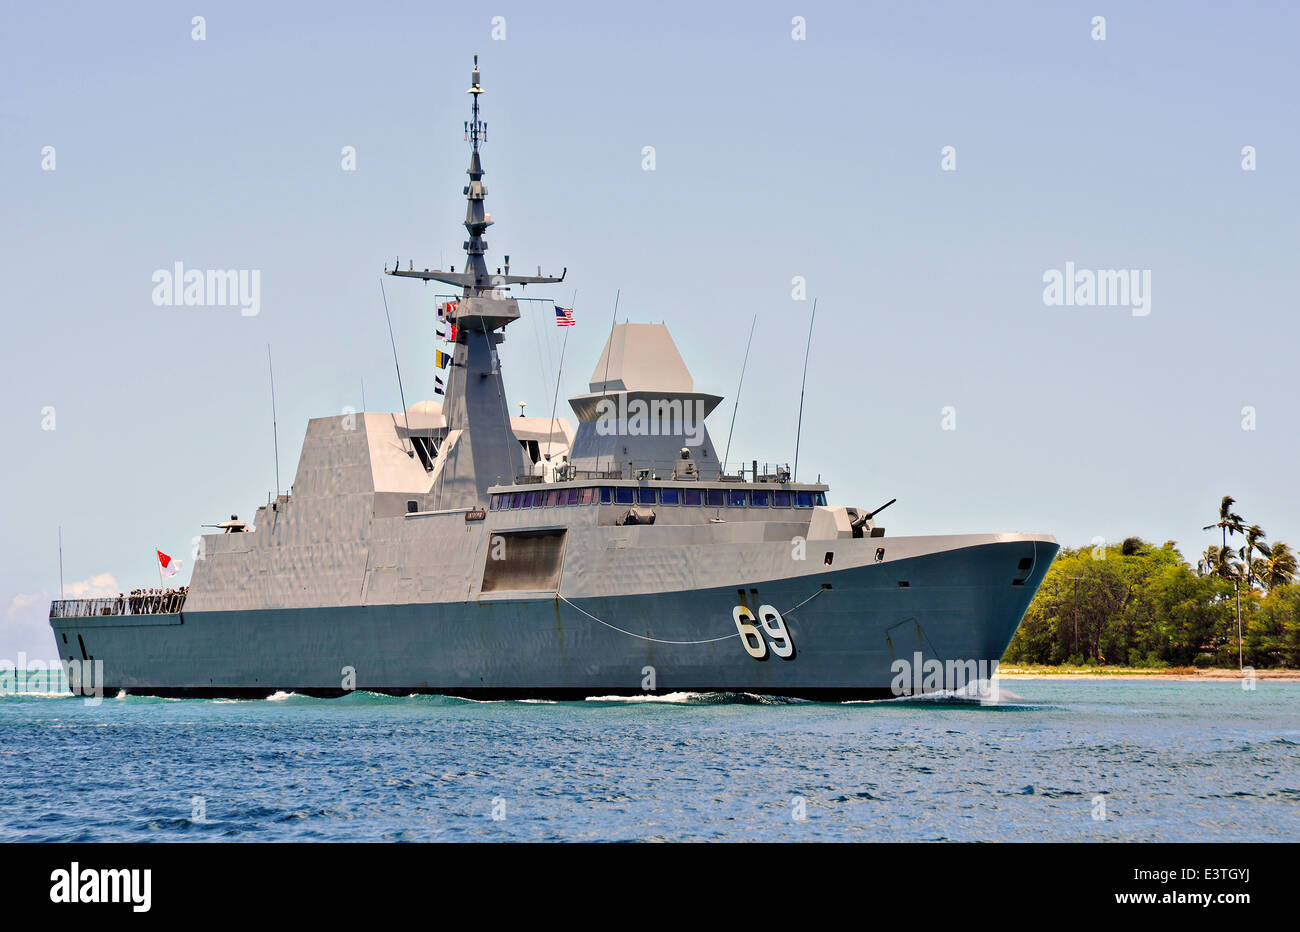 Republic of Singapore Formidable-class multi-role stealth frigate RSS Intrepid transits into Joint Base Pearl Harbor-Hickam for Rim of the Pacific exercise June 24, 2014 in Honolulu, Hawaii. Stock Photo